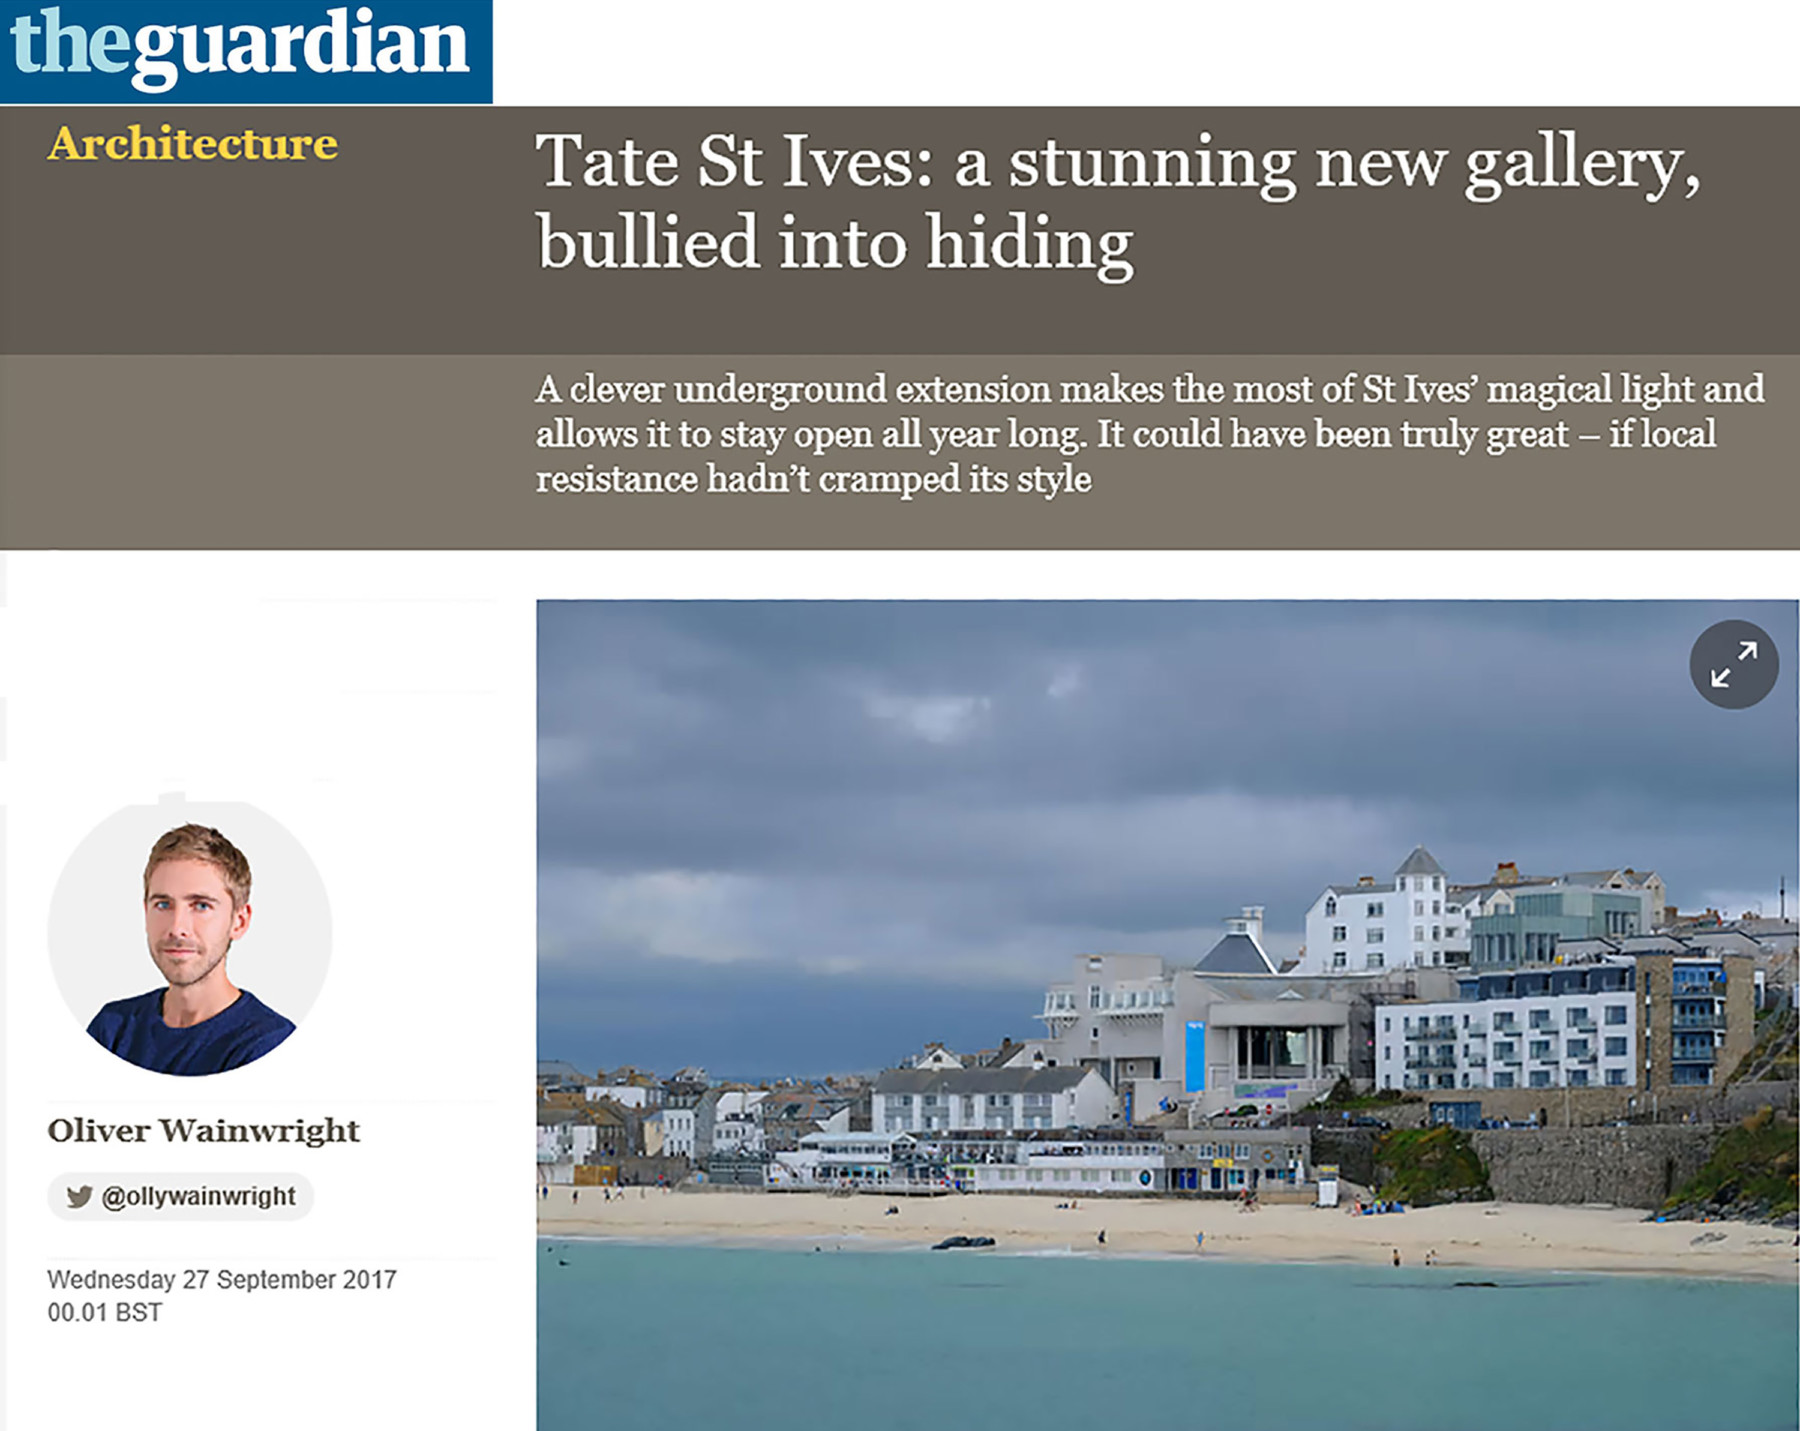 Jamie-Fobert-Architects-Guardian-Oliver-Wainwright-Online-Magazine-Tate-St-Ives-Cultural-Gallery-Modern-Contemporary-News-Project-Press-Article